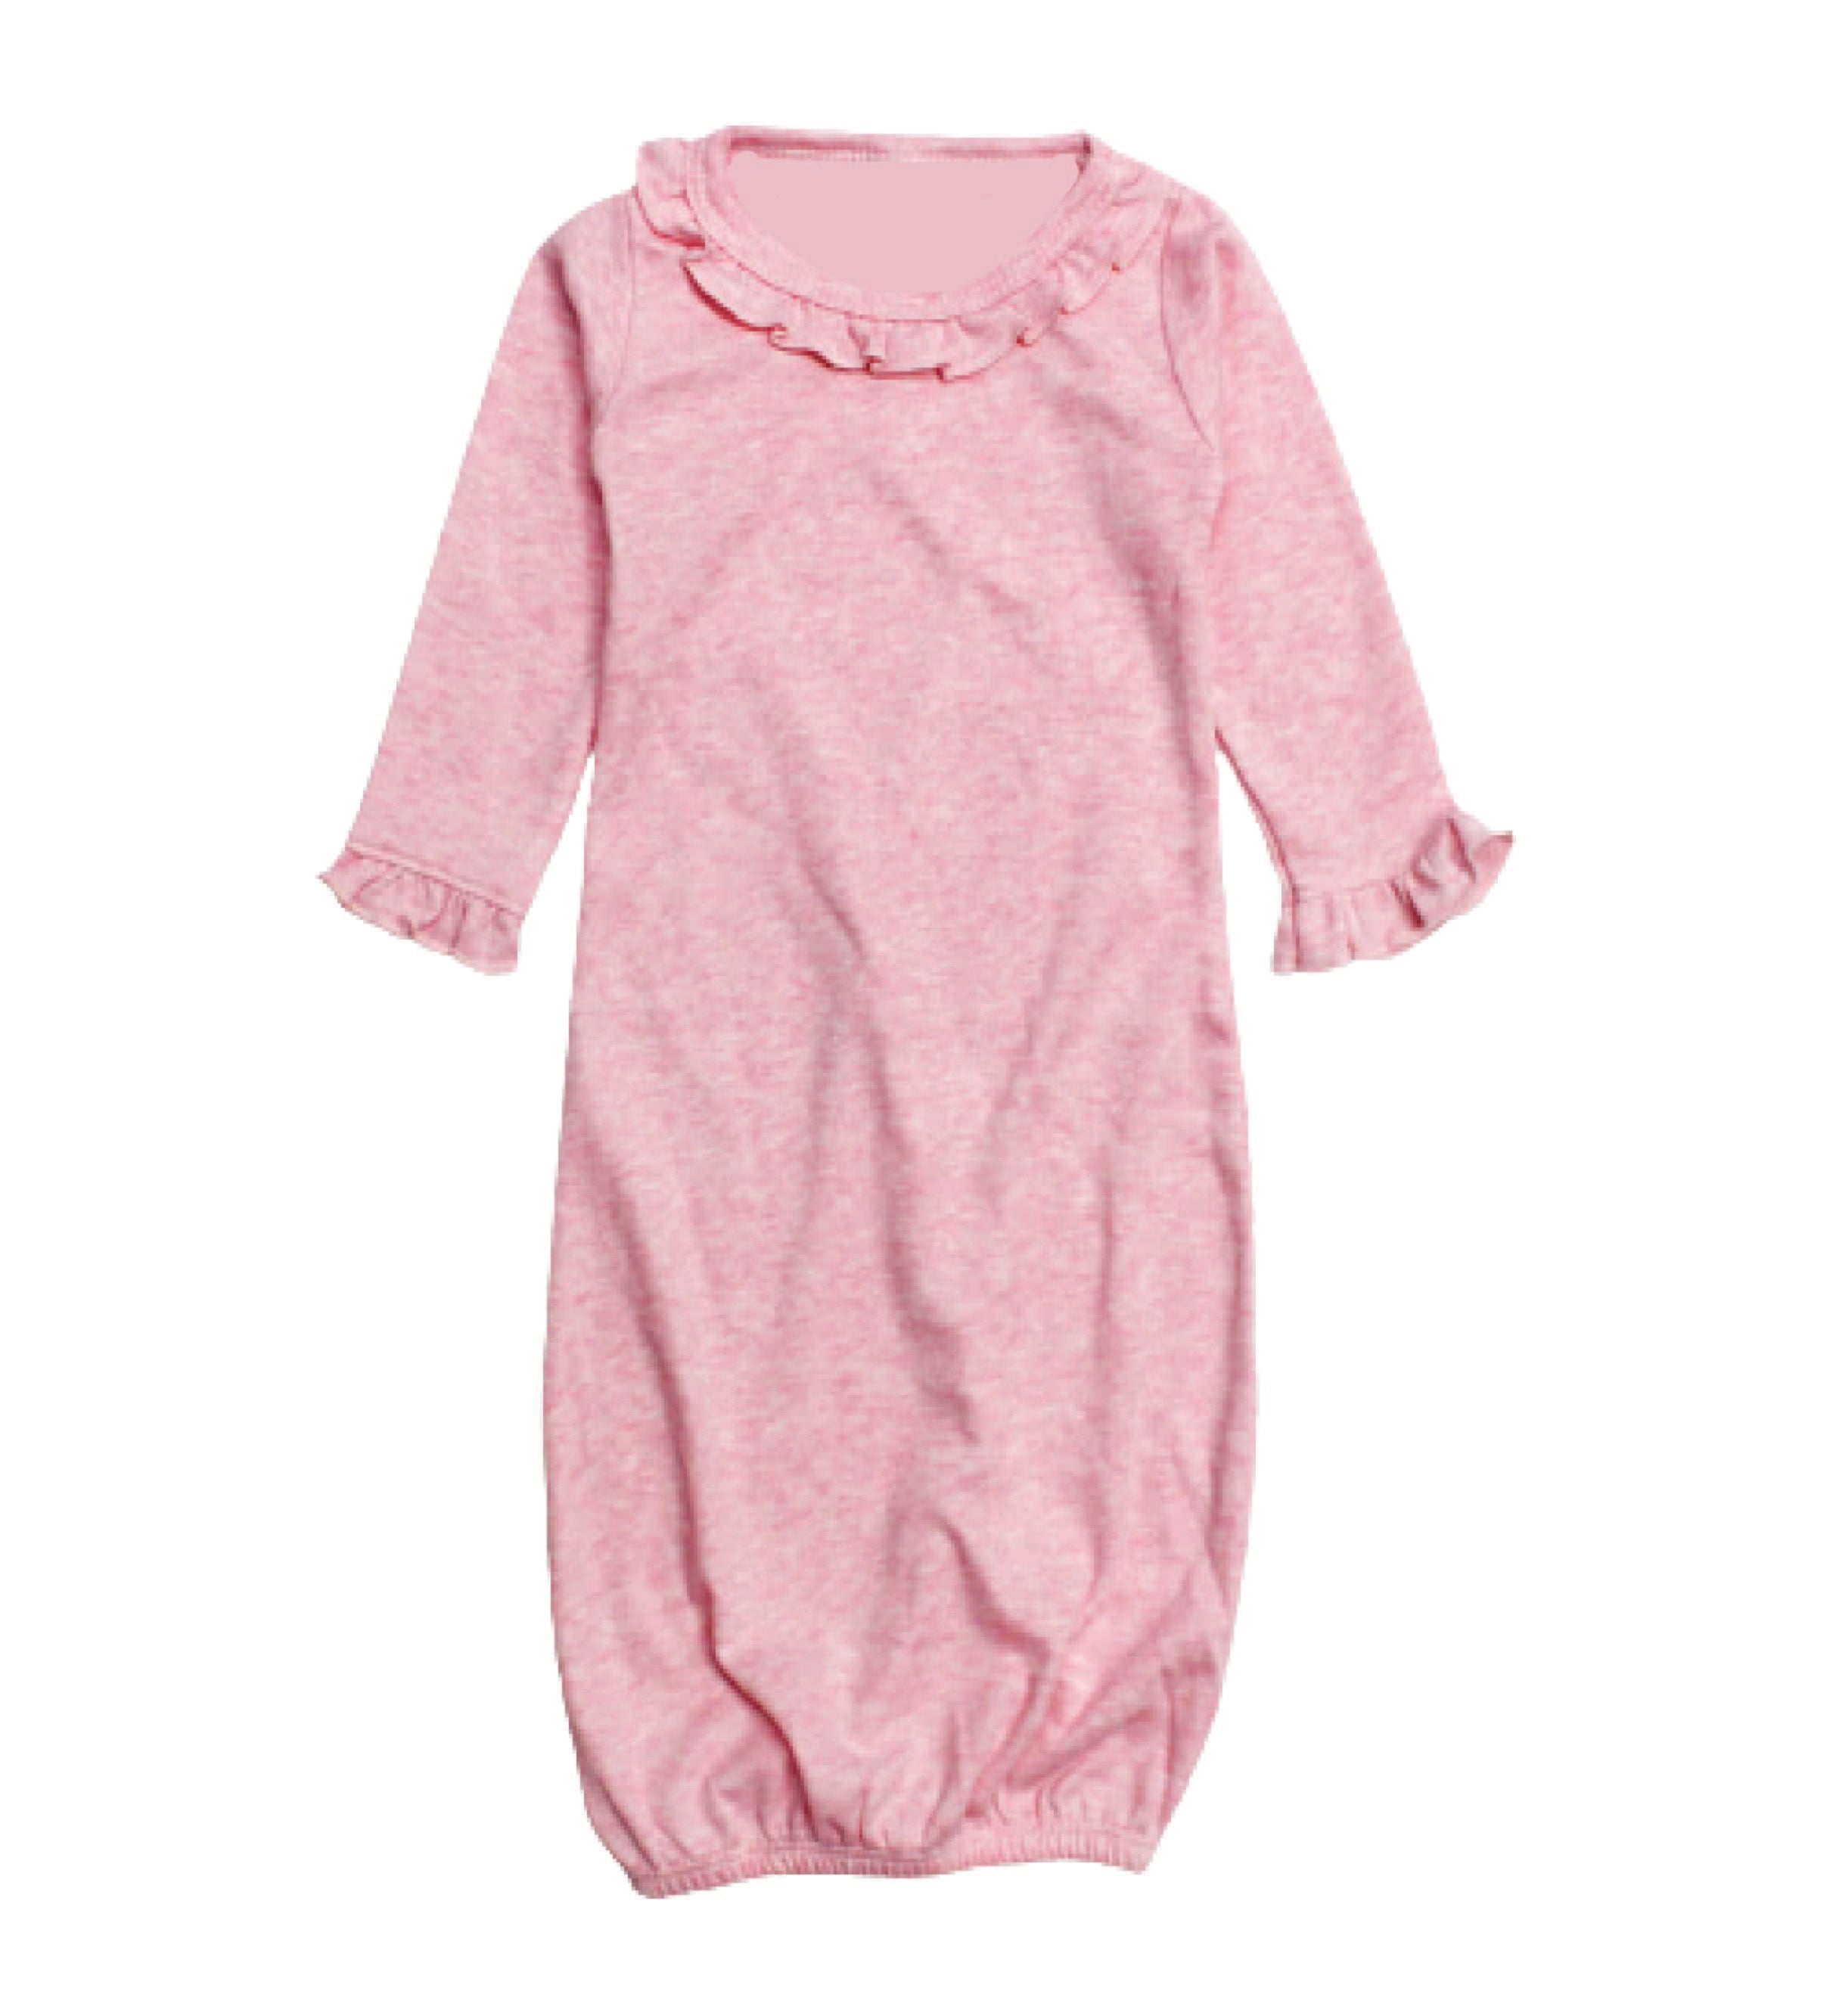 Sublimation Gown with Ruffle Trim, (65% Polyester - 35% Cotton), Candy Pink